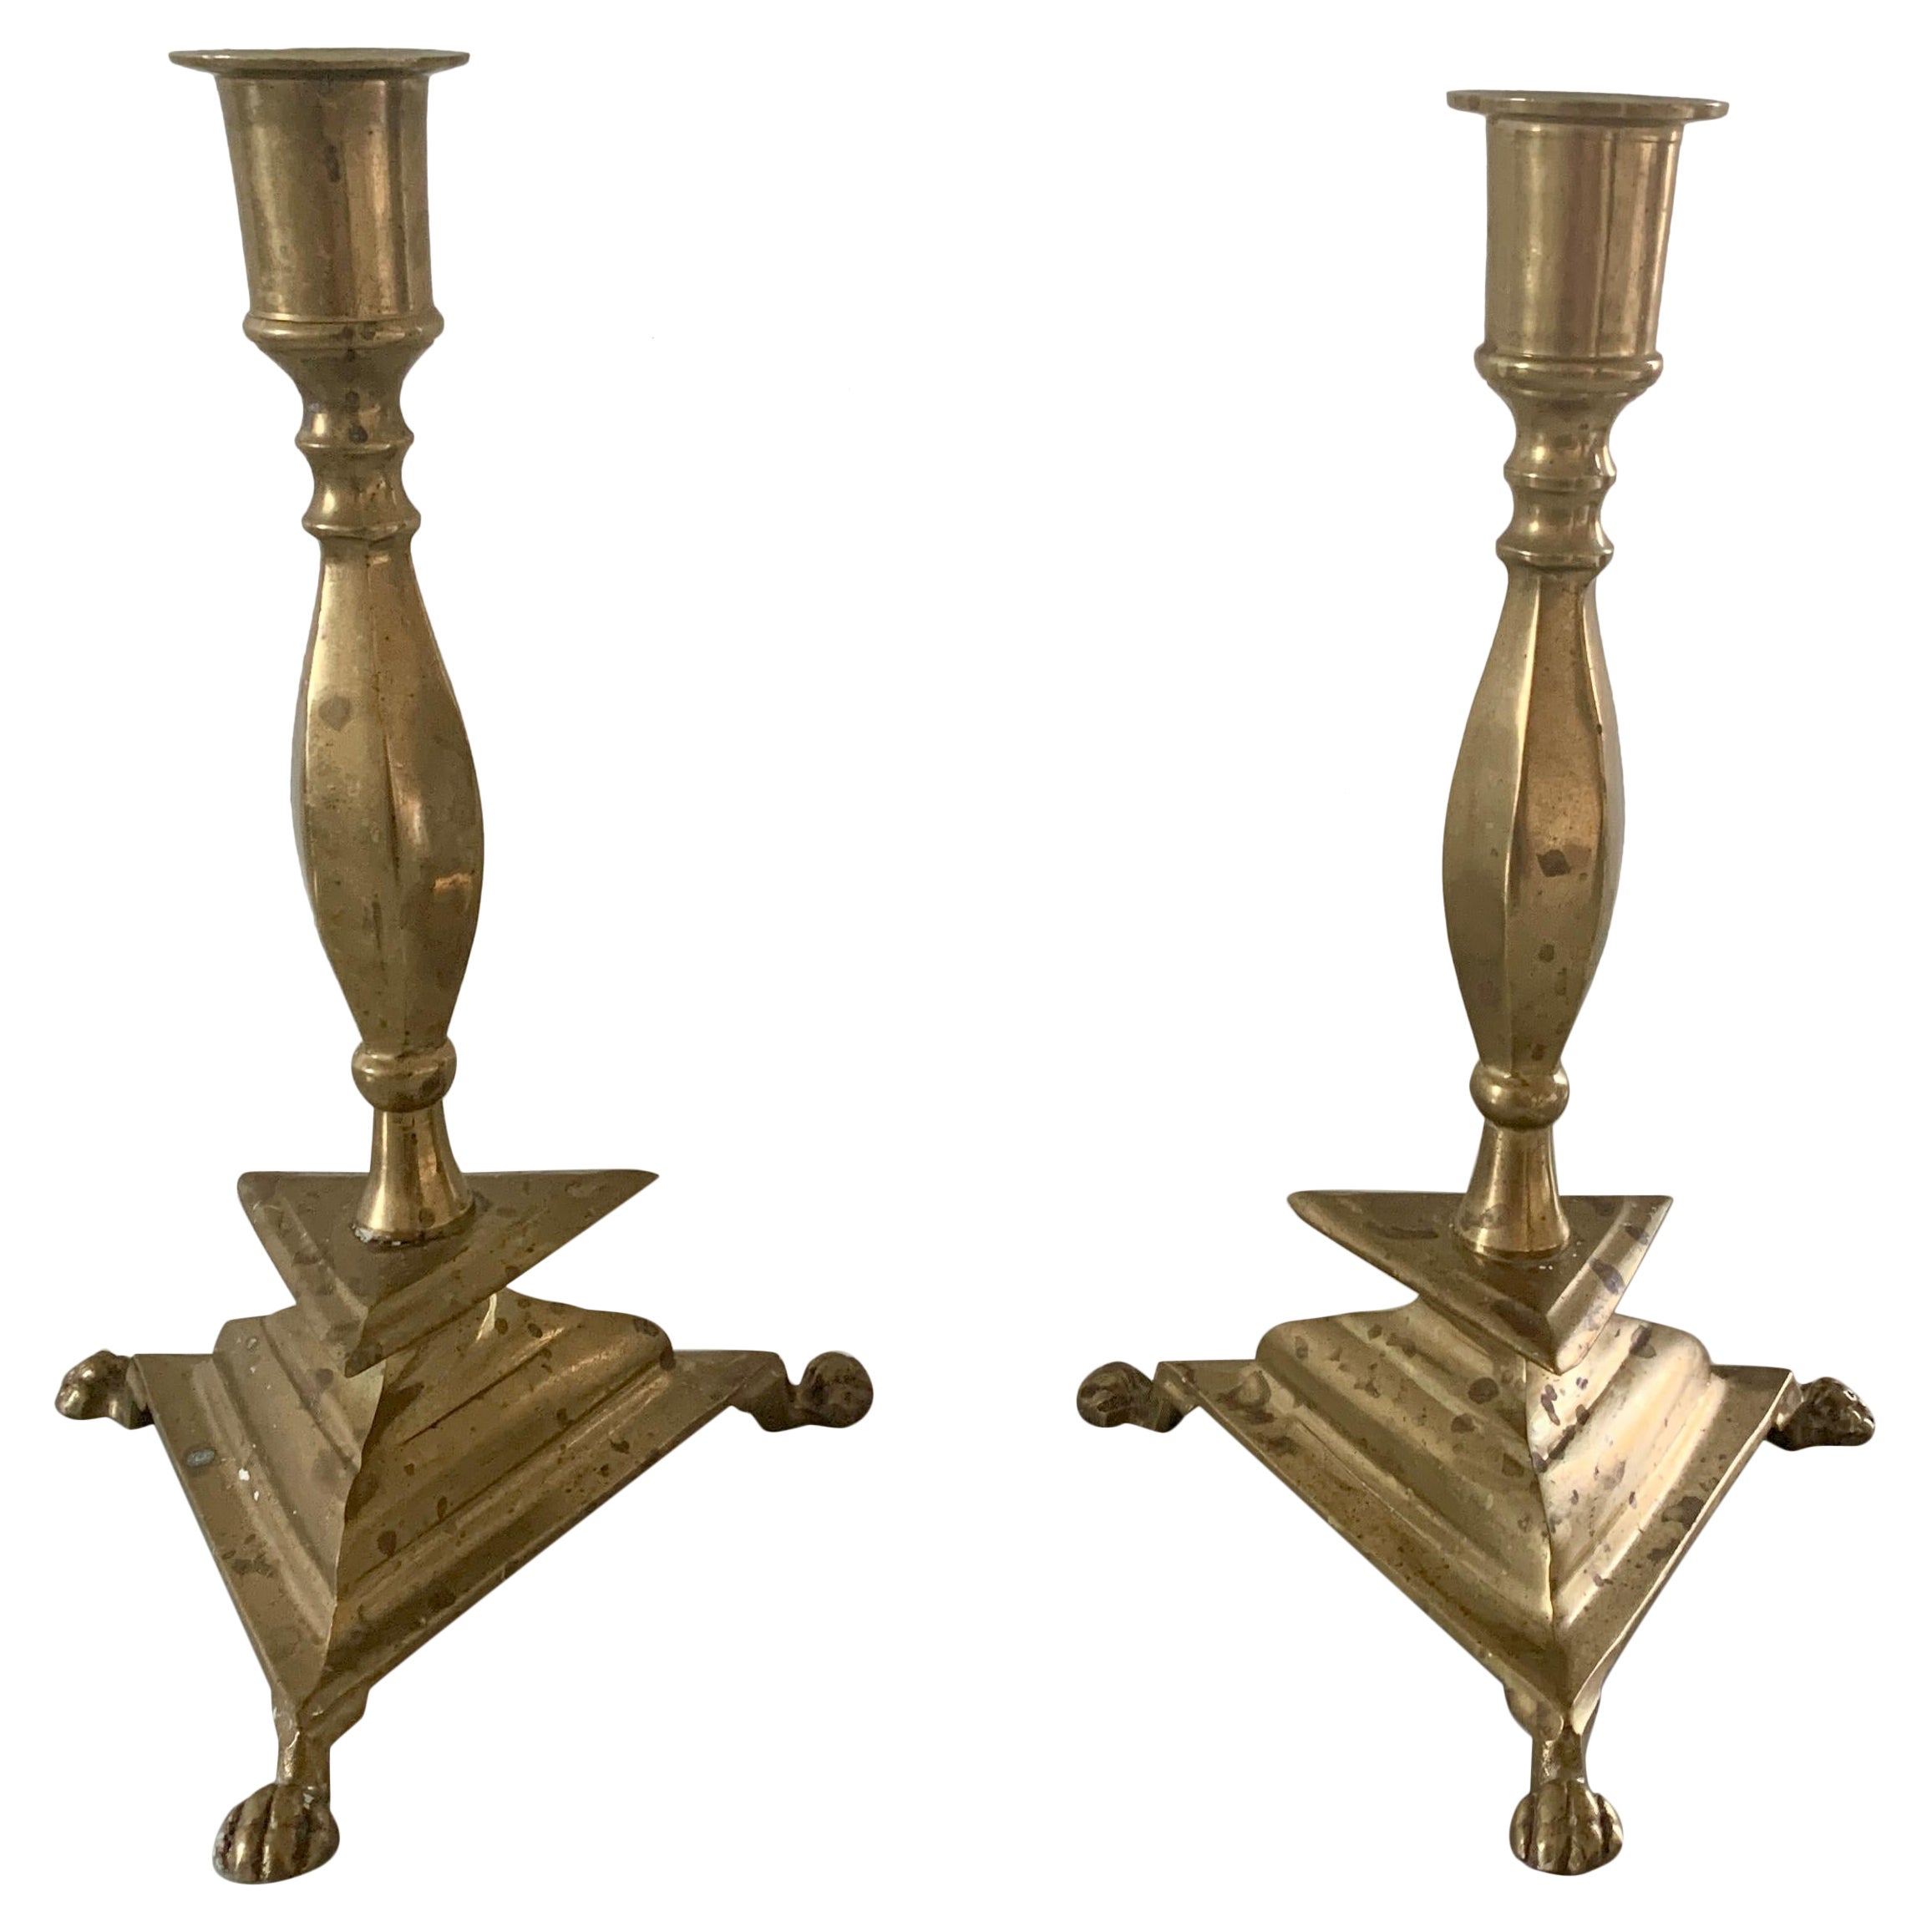 Neoclassical Brass Paw Foot Candlestick Holders, Pair